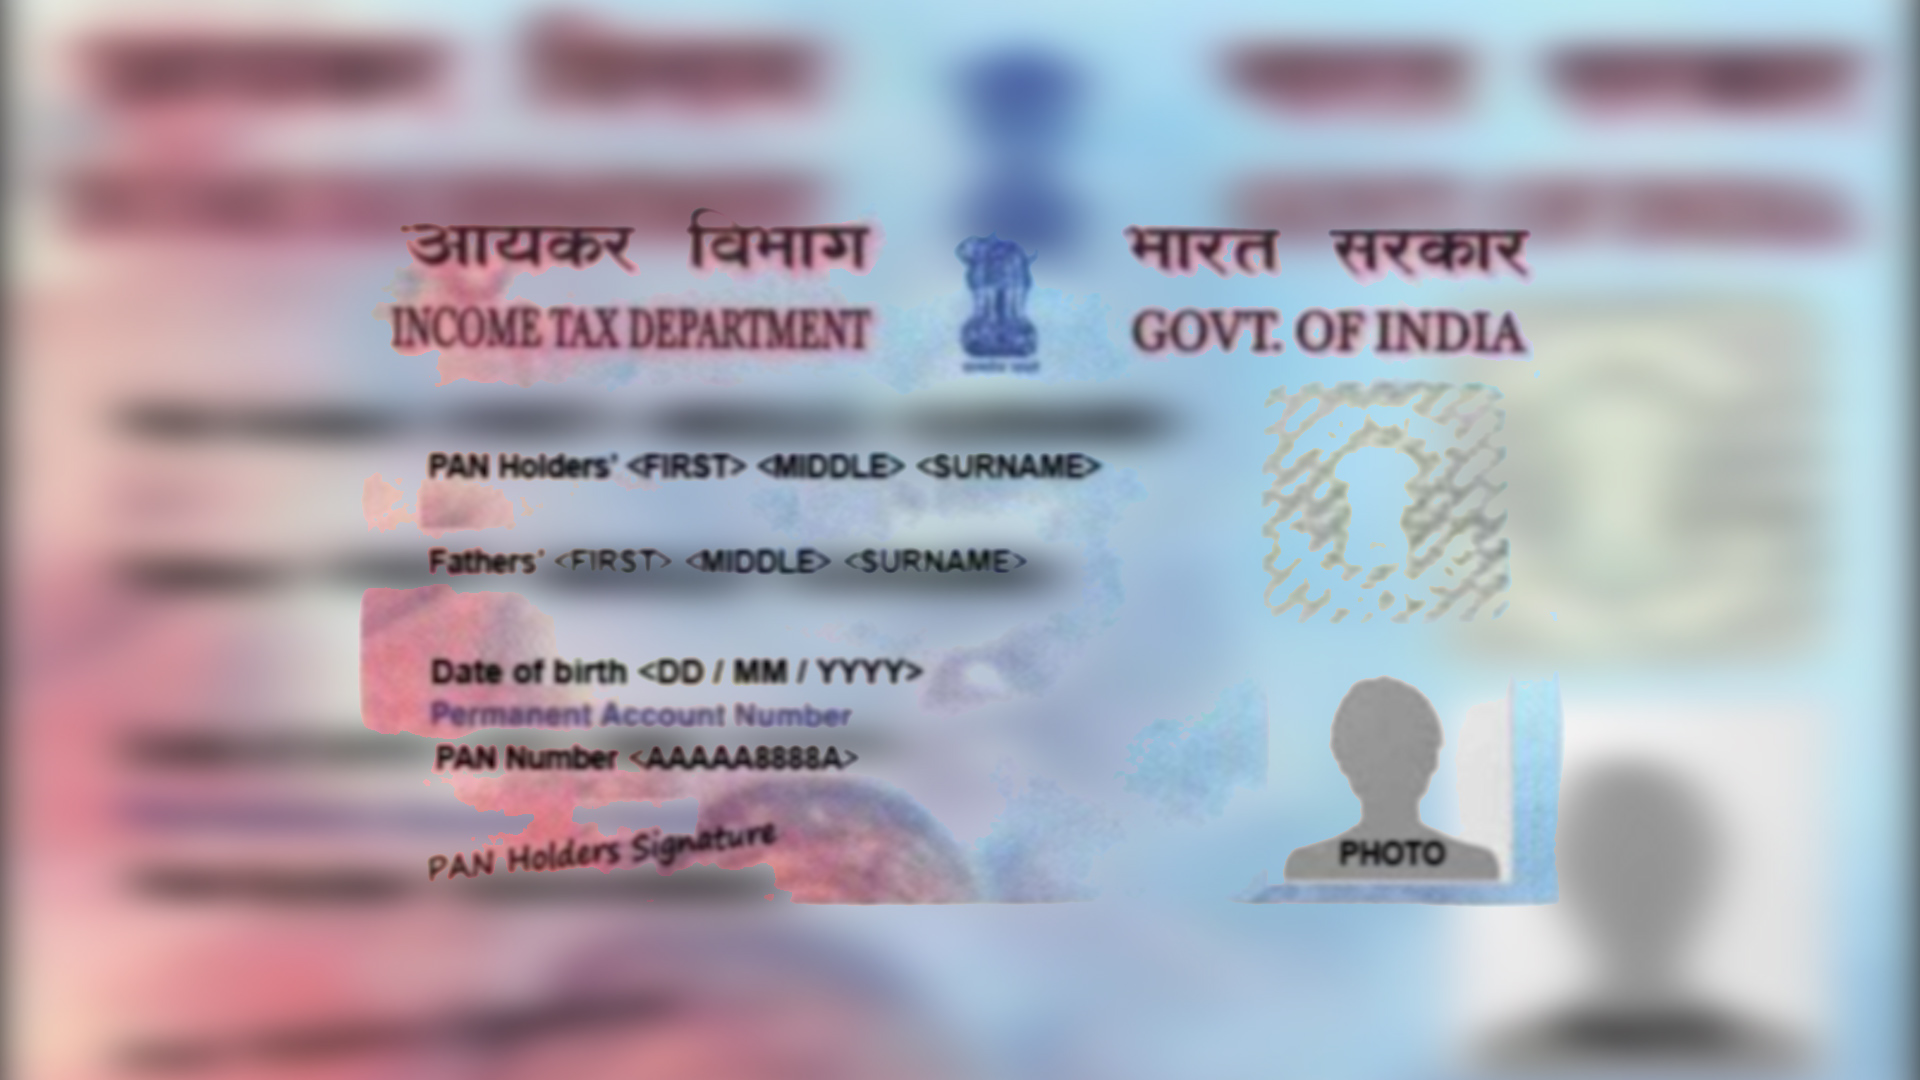 Union Budget 2023: Simplifying the KYC Process with PAN as Universal Identifier